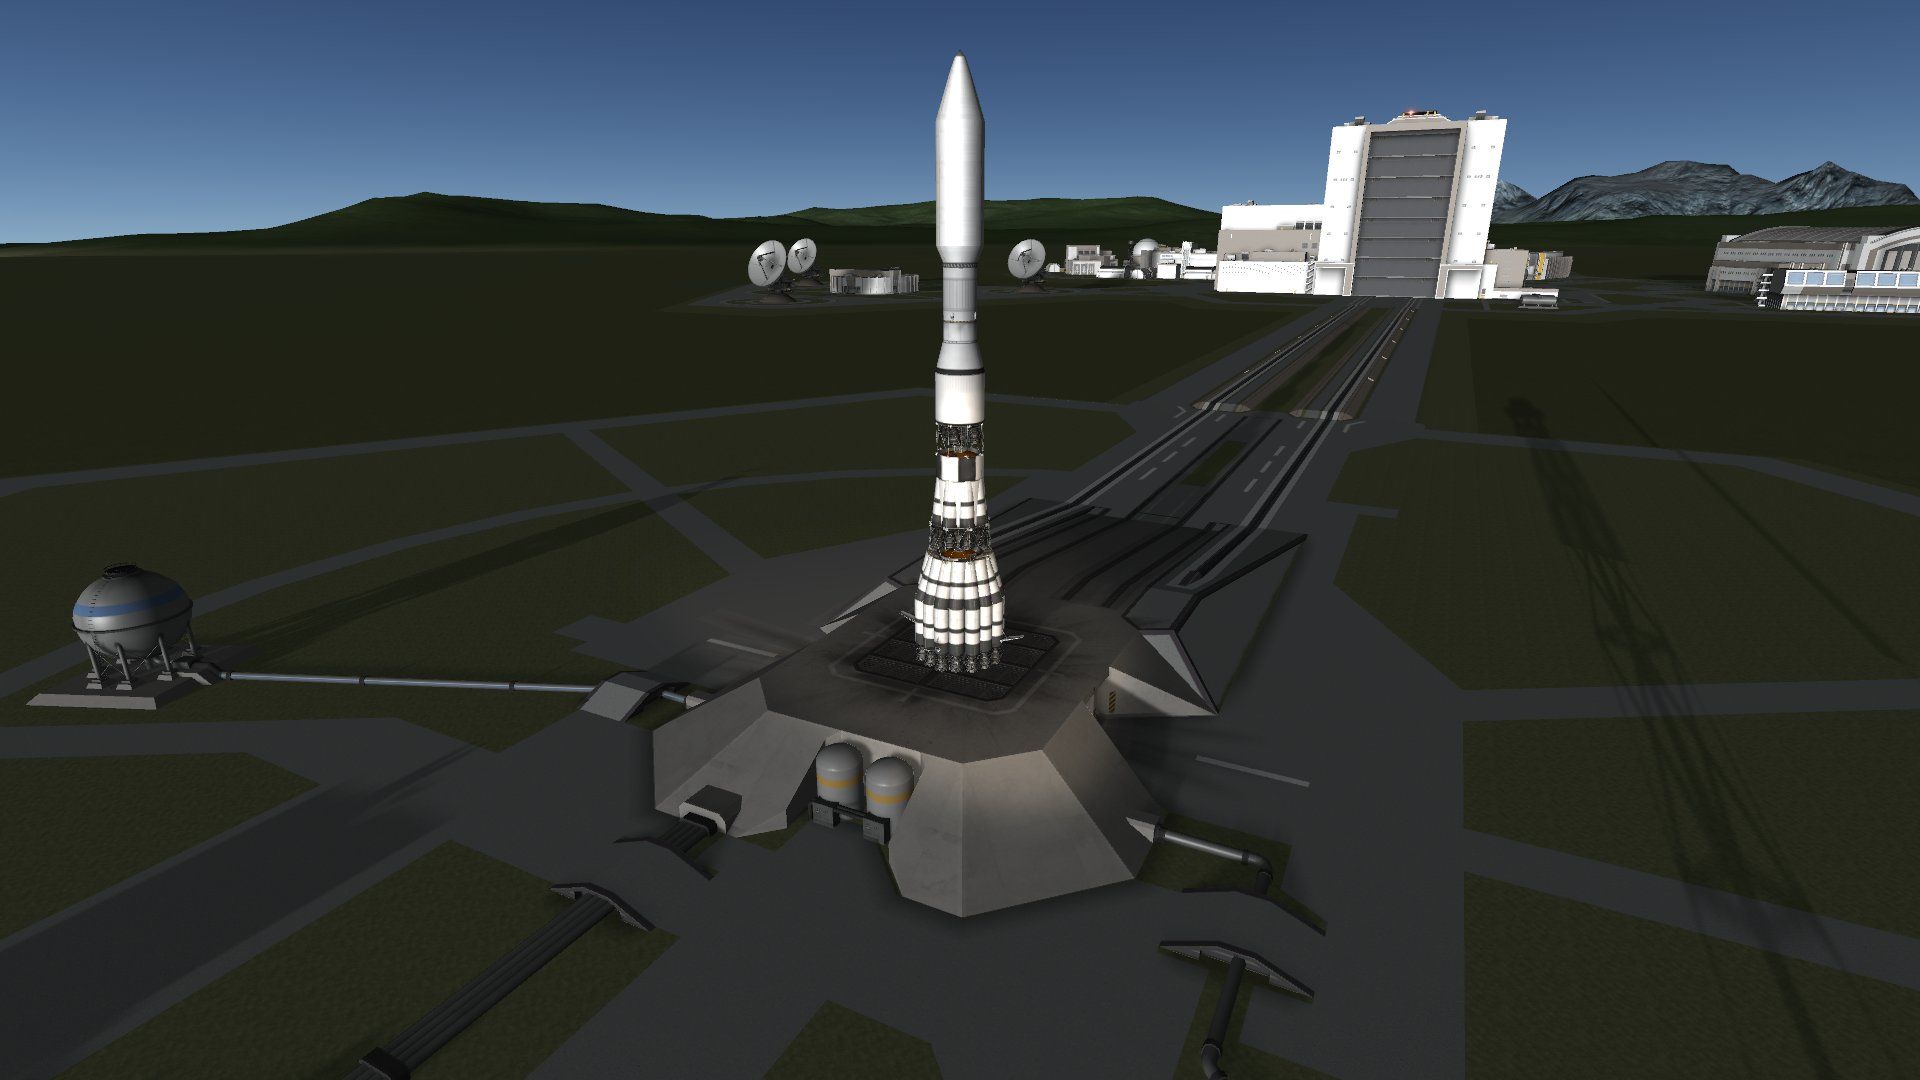 FazzoMetal replica of the Soviet N1 rocket% stock! I hope to post the entire recreation of the Soviet Moon mission soon too! #Kerbal #KSP #rocket #N1 #moon #